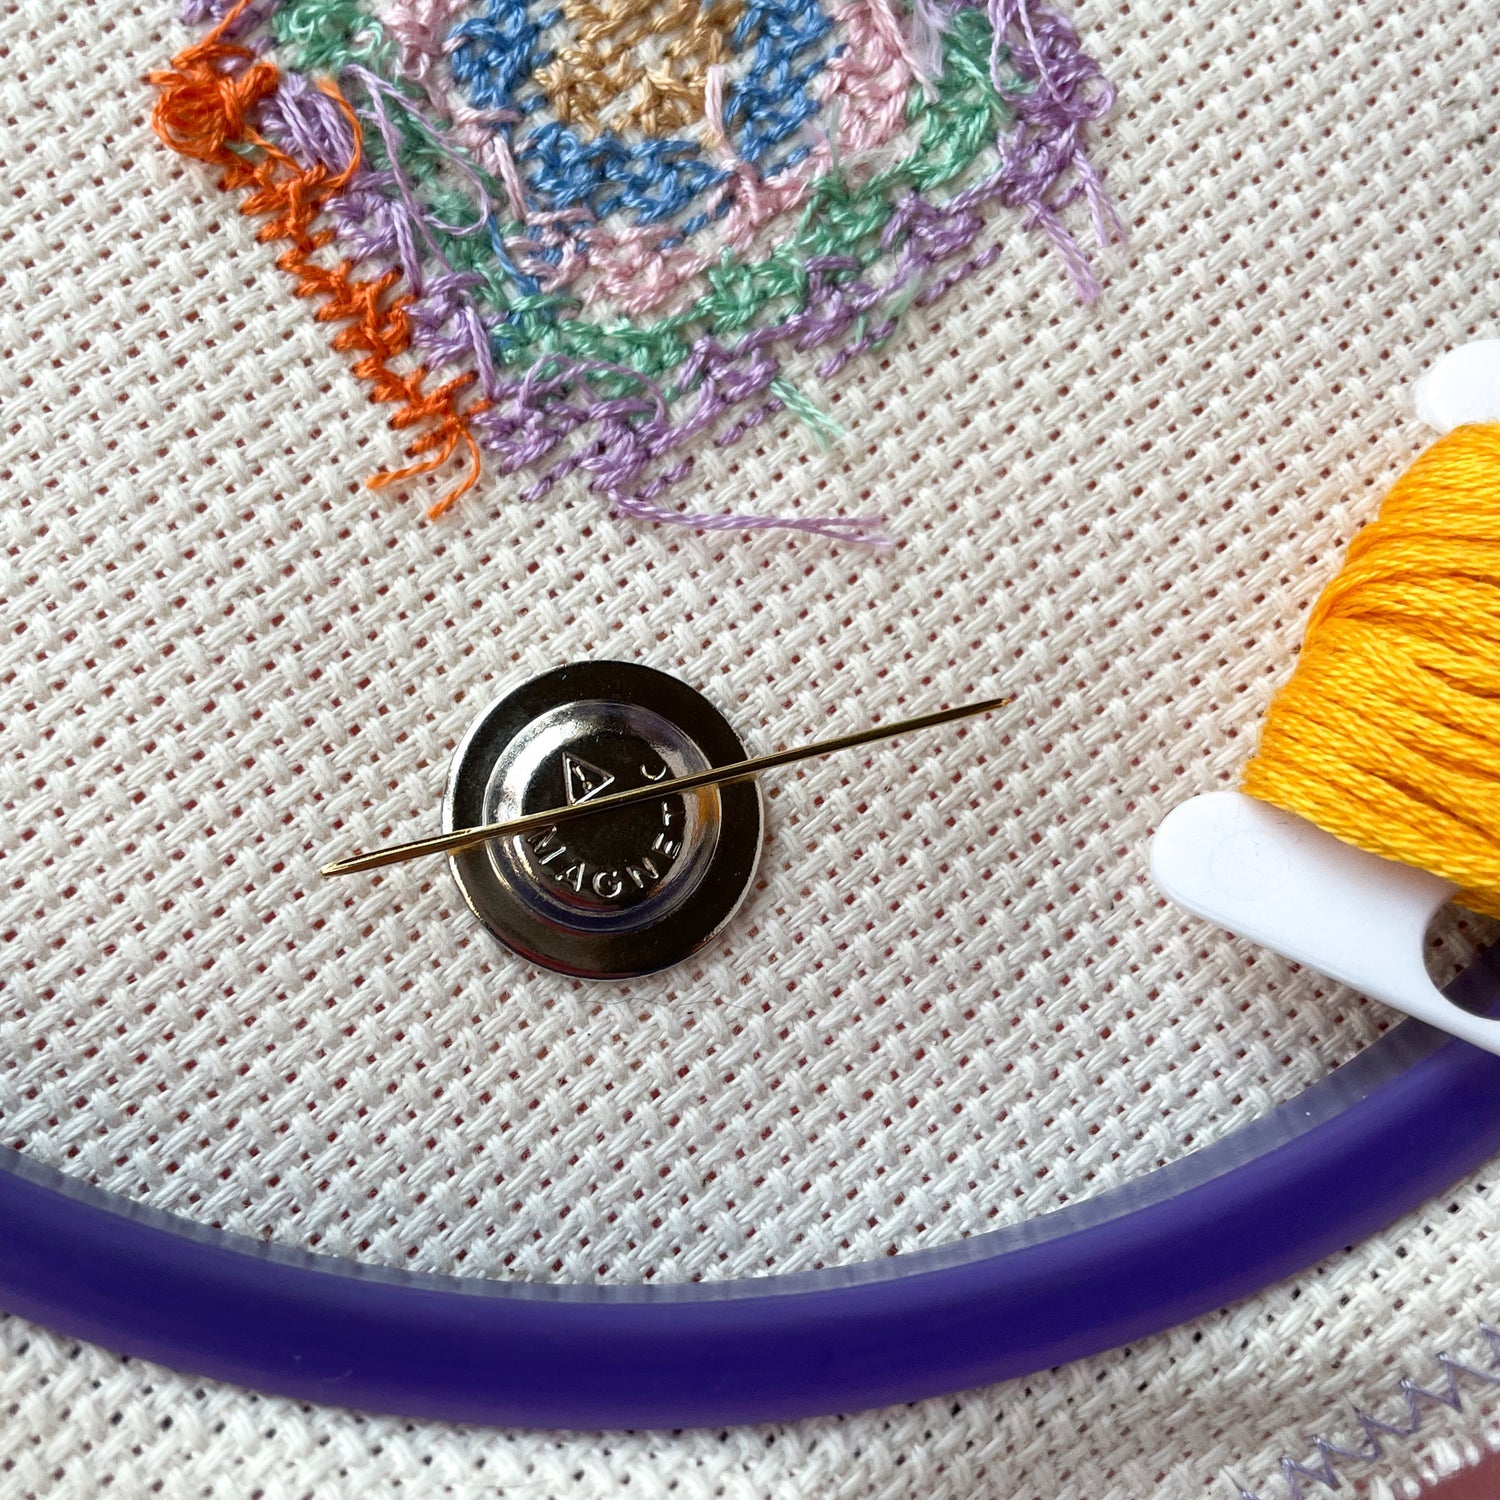 Kitty With A Cupcake - Needle Holder Magnet